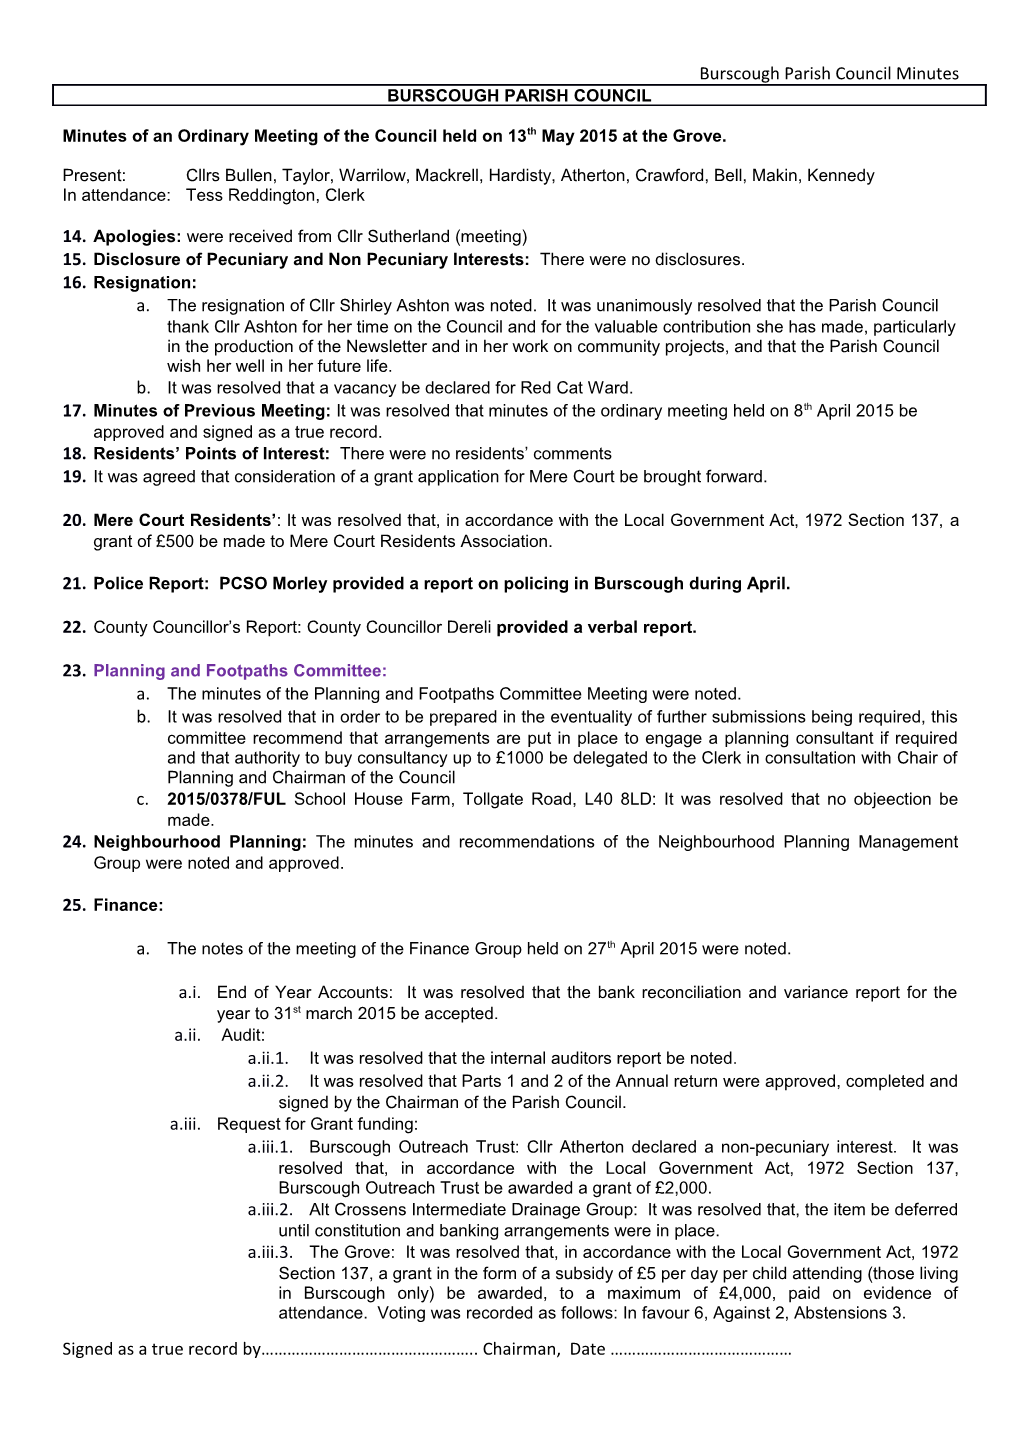 Minutes of an Ordinary Meeting of the Council Held on 13Th May2015 at the Grove